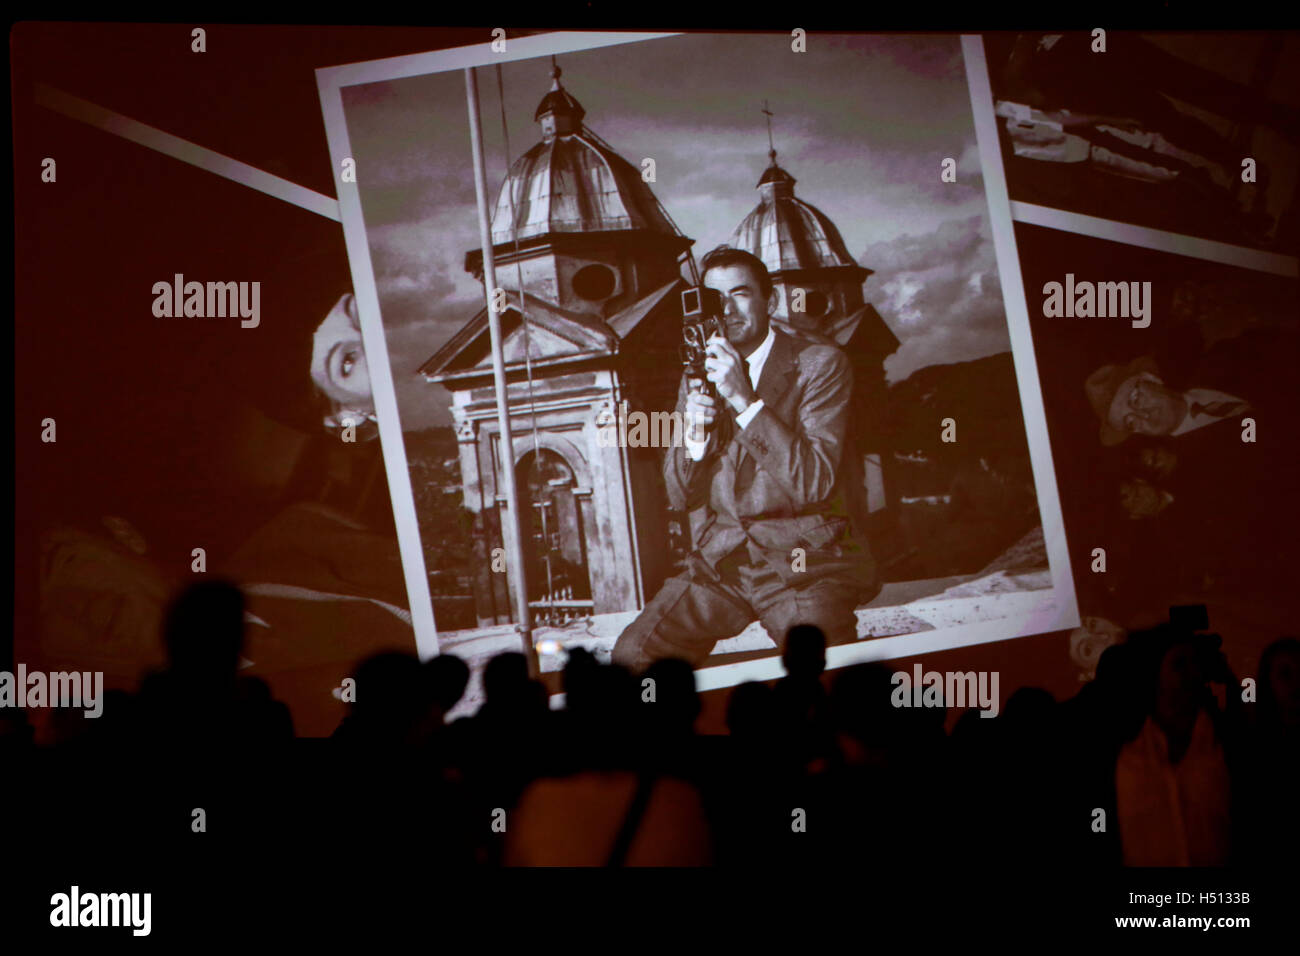 Rome. 18th Oct, 2016. A photo of late U.S. actor Gregory Peck taken in Rome is presented on the screen at Spanish Square on Oct. 18, 2016 in Rome, Italy. The well-known movie Rome Holiday starring Gregory Peck and Audrey Hepburn was screened on Tuesday at Spanish Square of Rome to celebrate the centenary of the birth of Gregory Peck. © Jin Yu/Xinhua/Alamy Live News Stock Photo